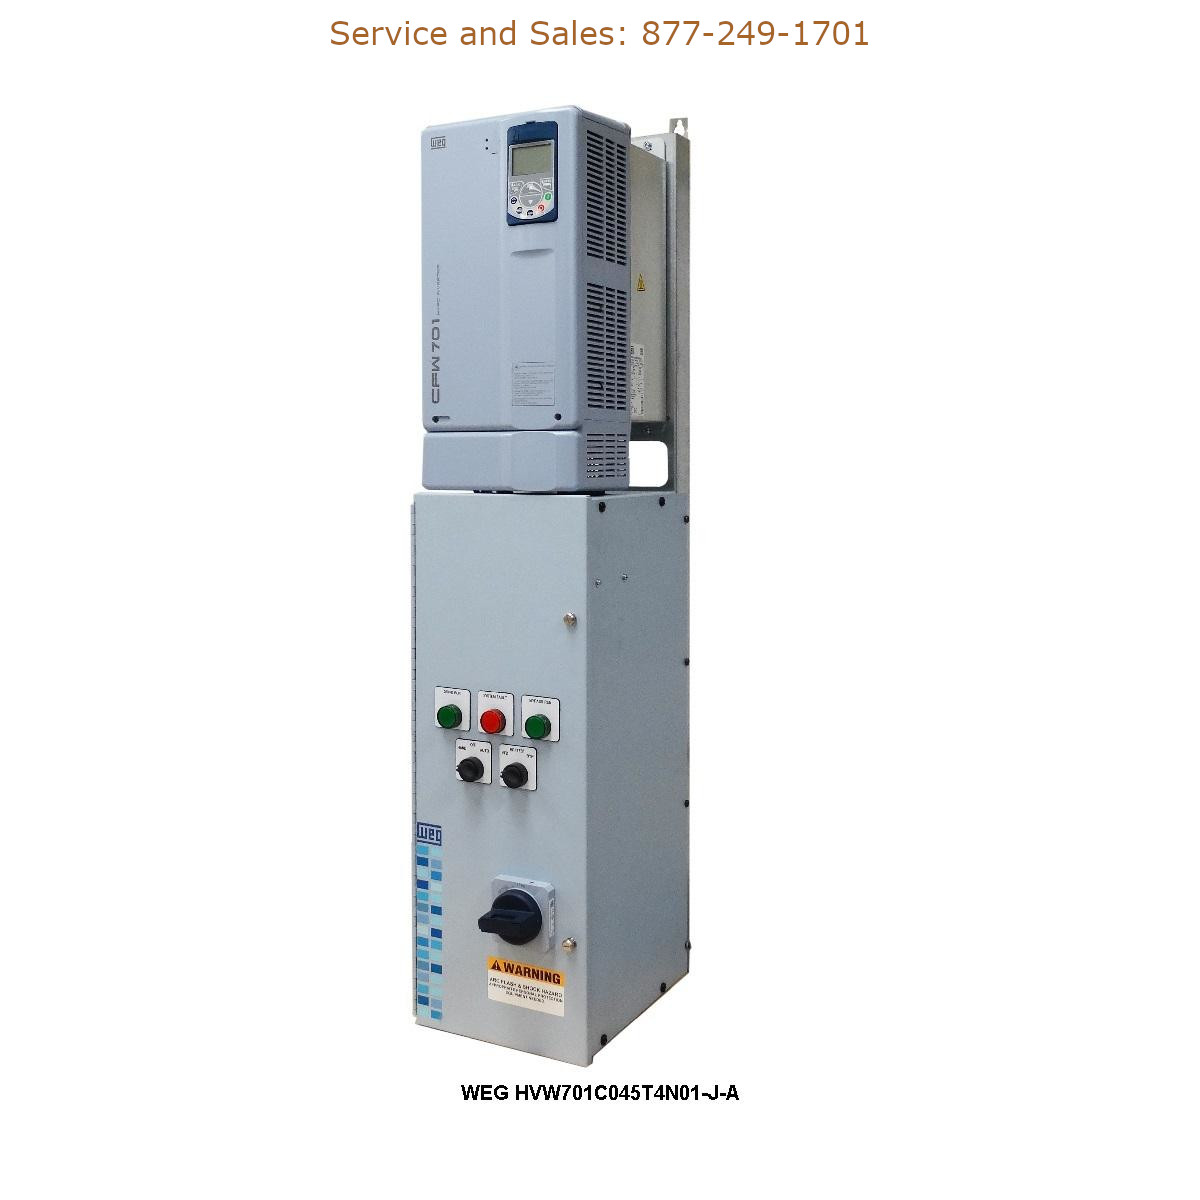 WEG HVW701C045T4N01-J-A WEG Model Number HVW701C045T4N01-J-A WEG Drives, Variable Speed Drives Repair Service, Troubleshooting, Replacement Parts https://gesrepair.com/wp-content/uploads/2022/WEG/WEG_HVW701C045T4N01-J-A_Drives_Variable_Speed_Drives.jpg